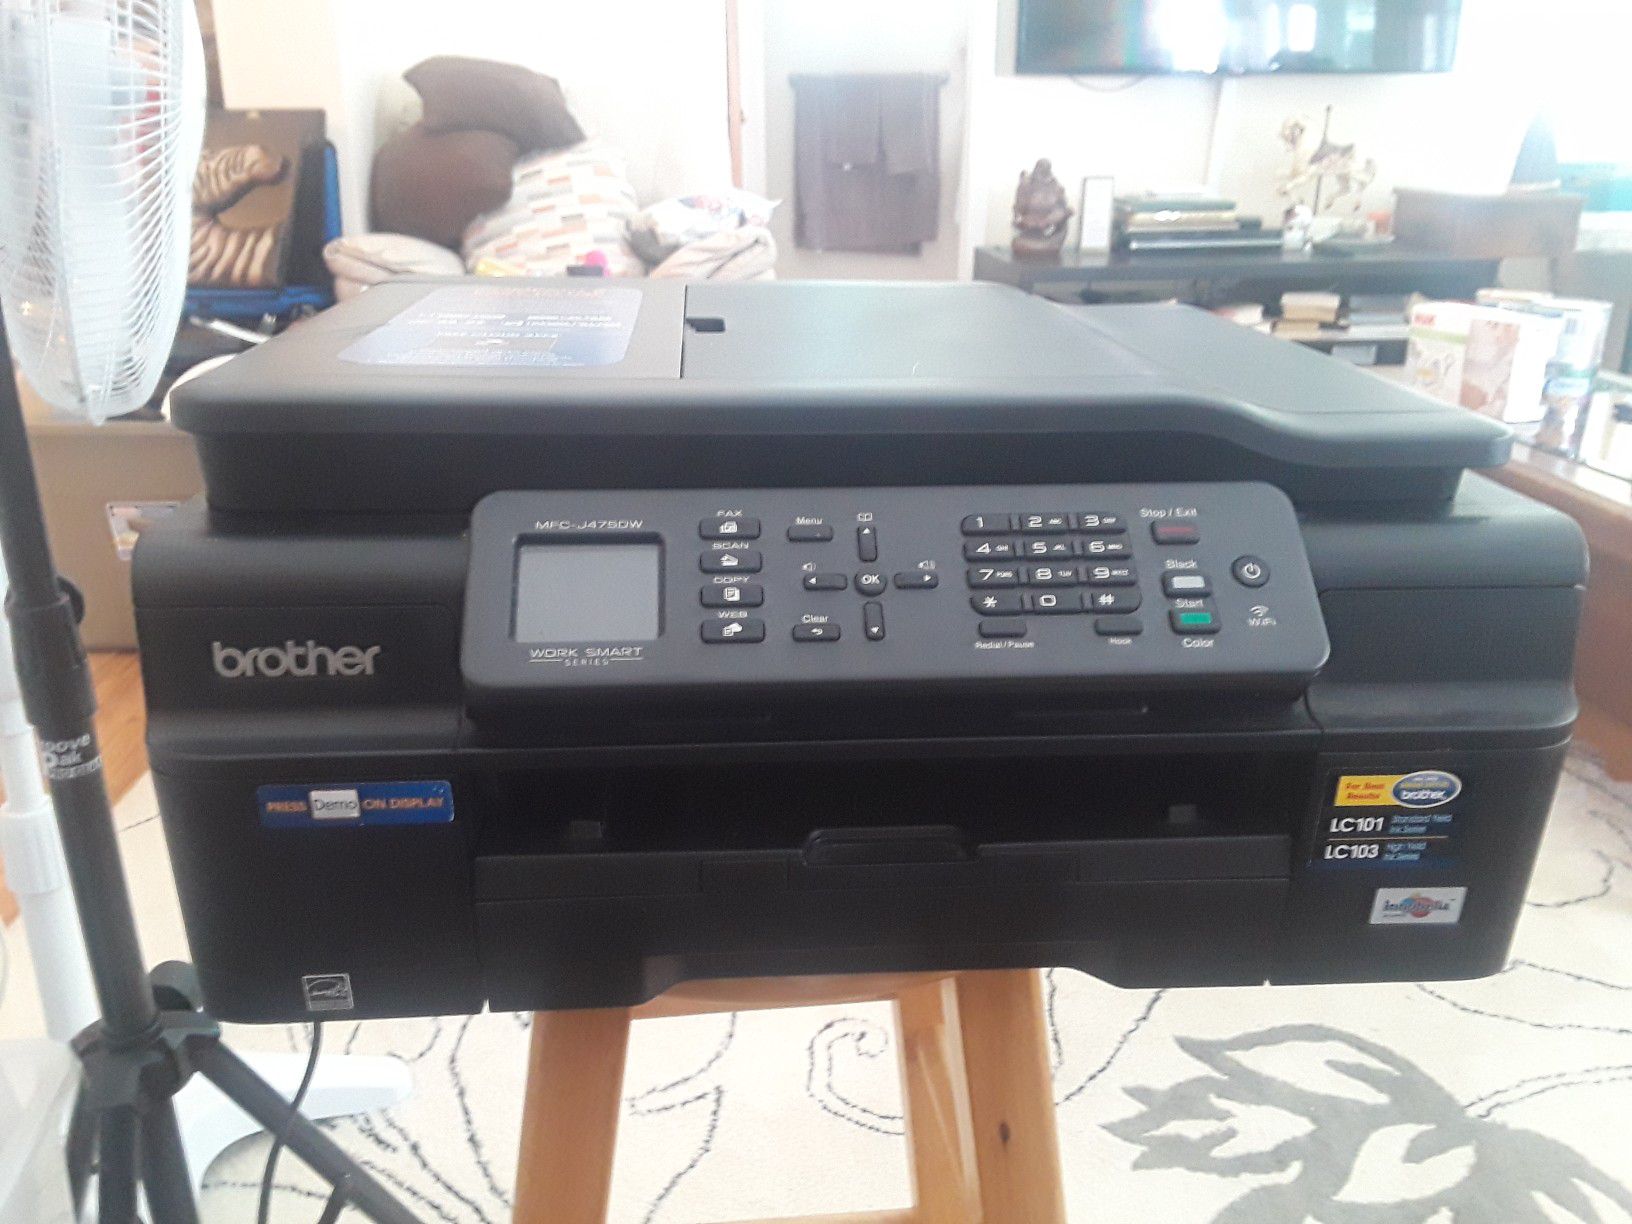 Brother MFC-J475DW Printer- Compact Wireless Inkjet All-in-One with Duplex Print